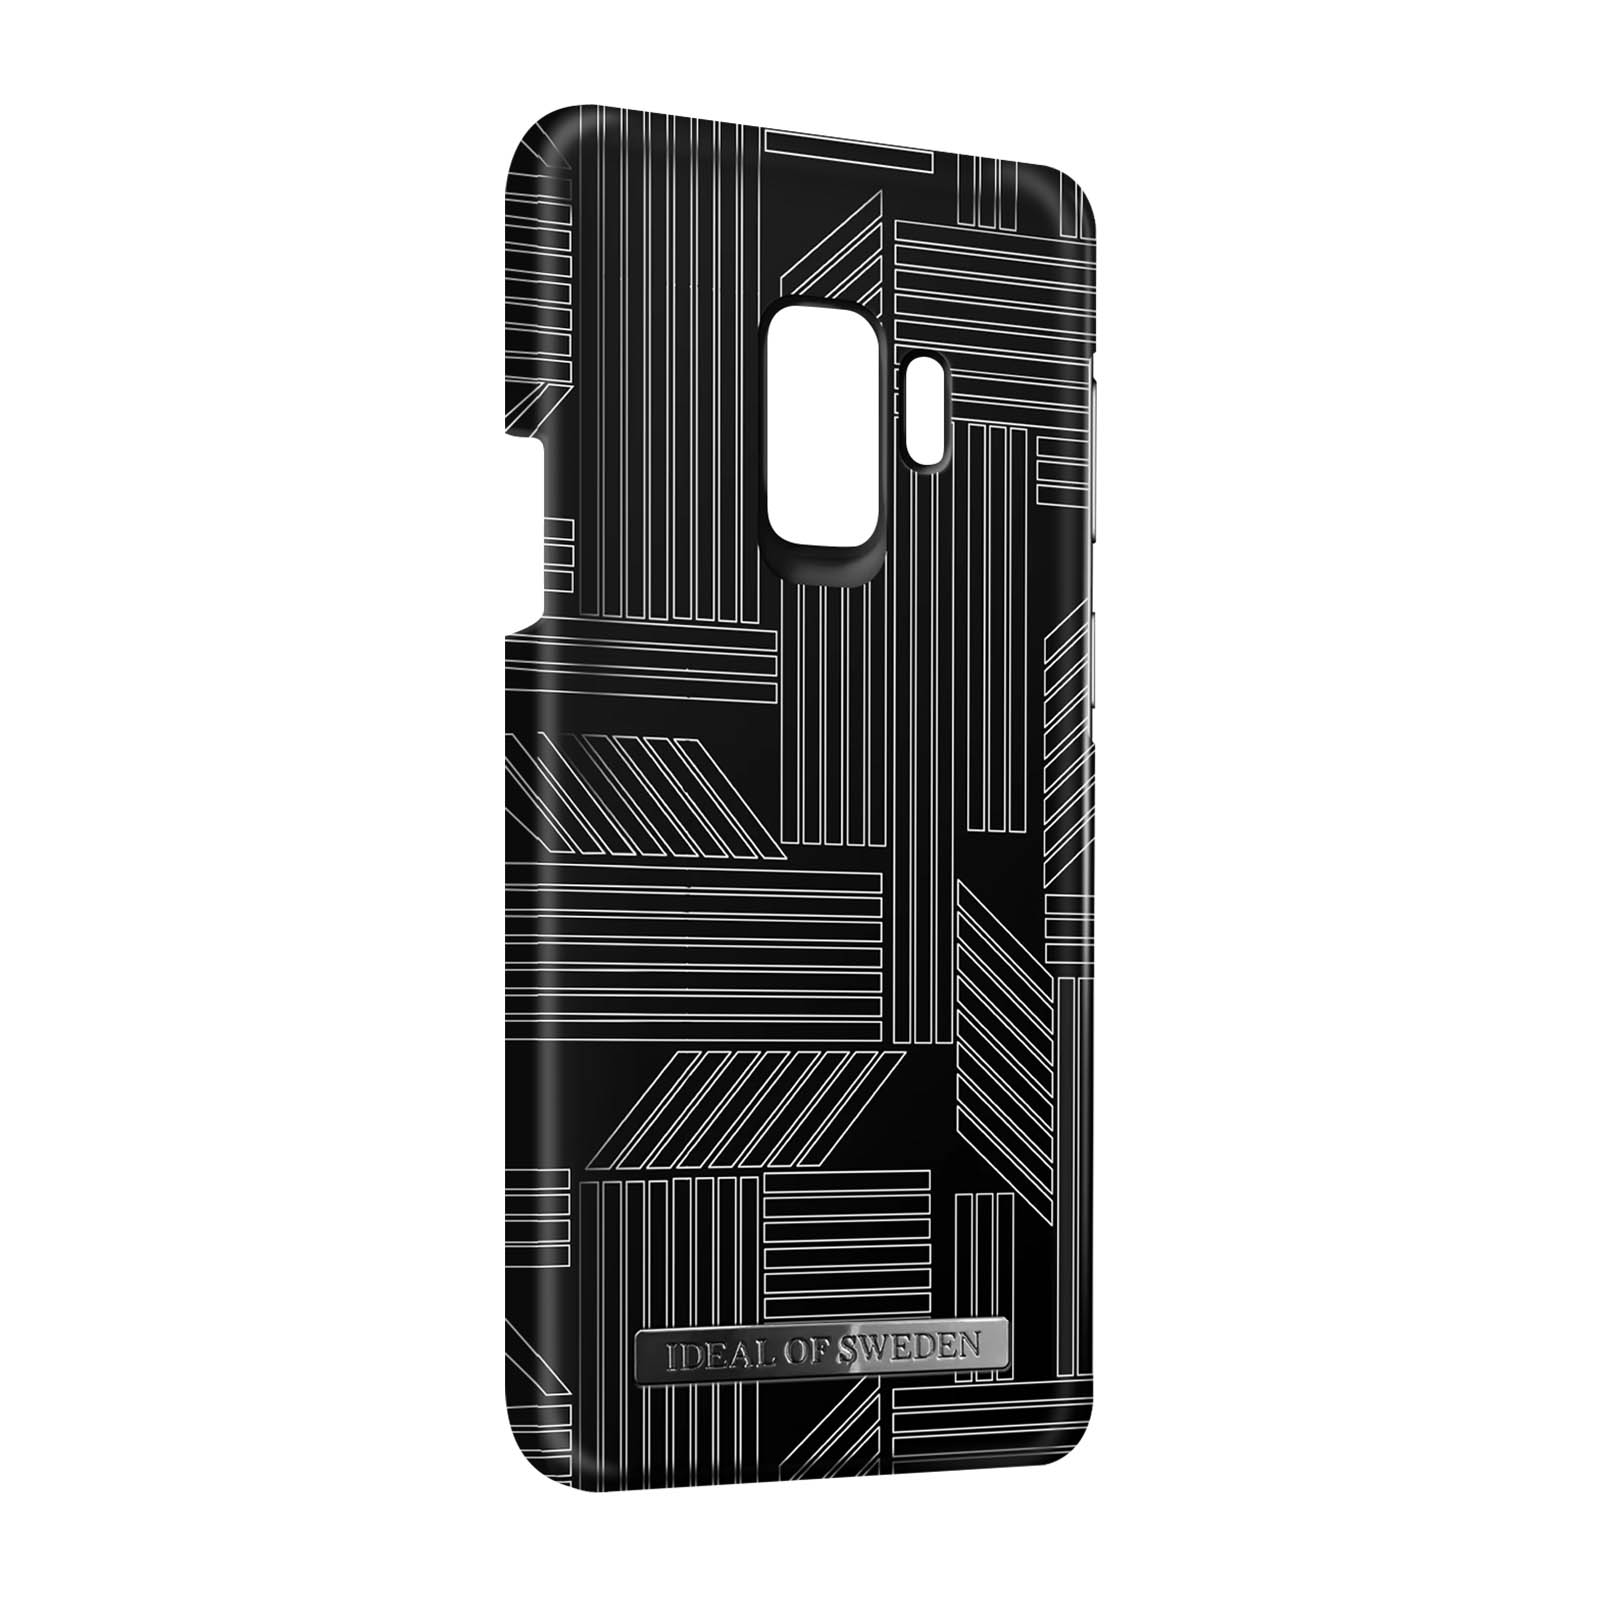 Series, Hülle Puzzle Samsung, IDEAL Galaxy SWEDEN Geometric Backcover, S9, OF Grau